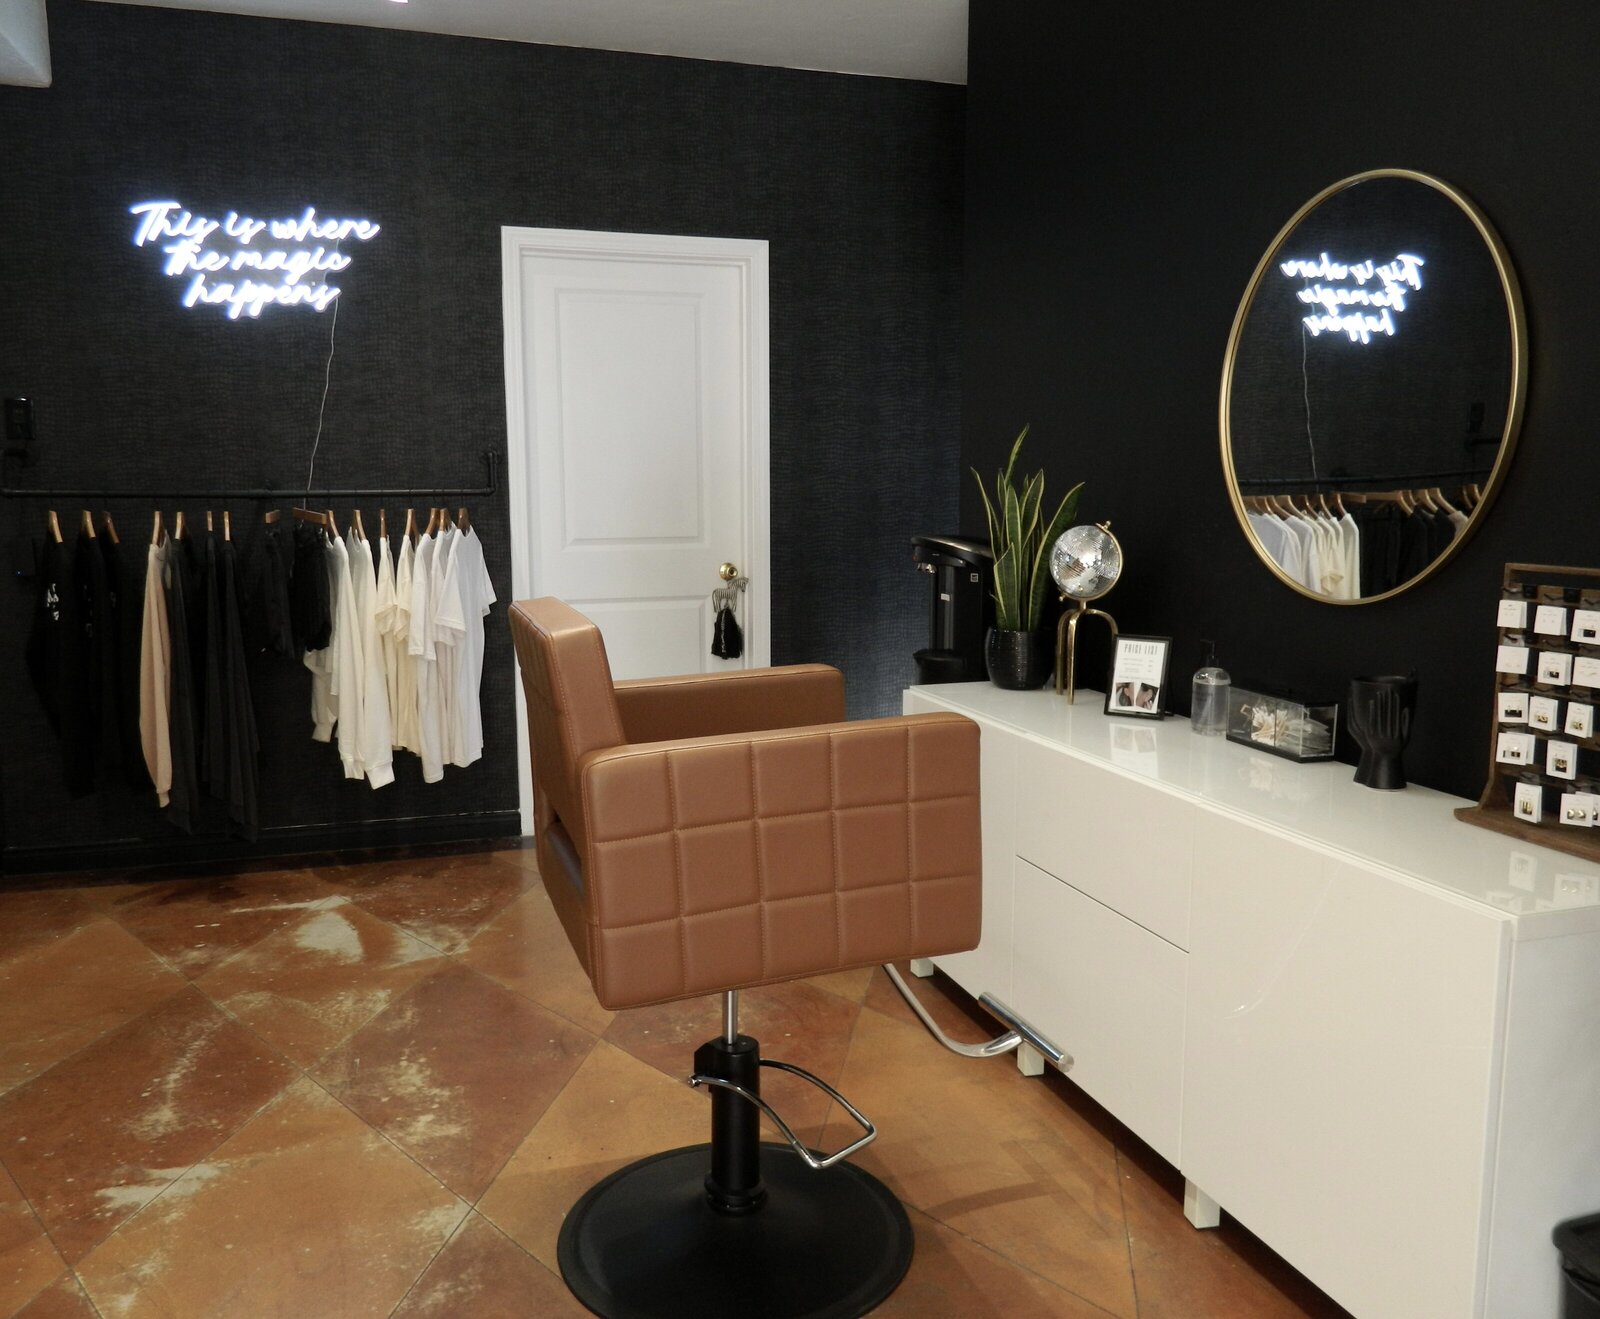 A photo of the interior of Wilde Beauty Co. in San Diego, showcasing the clean and sanitized environment that we maintain to ensure the safety and well-being of our clients and staff.